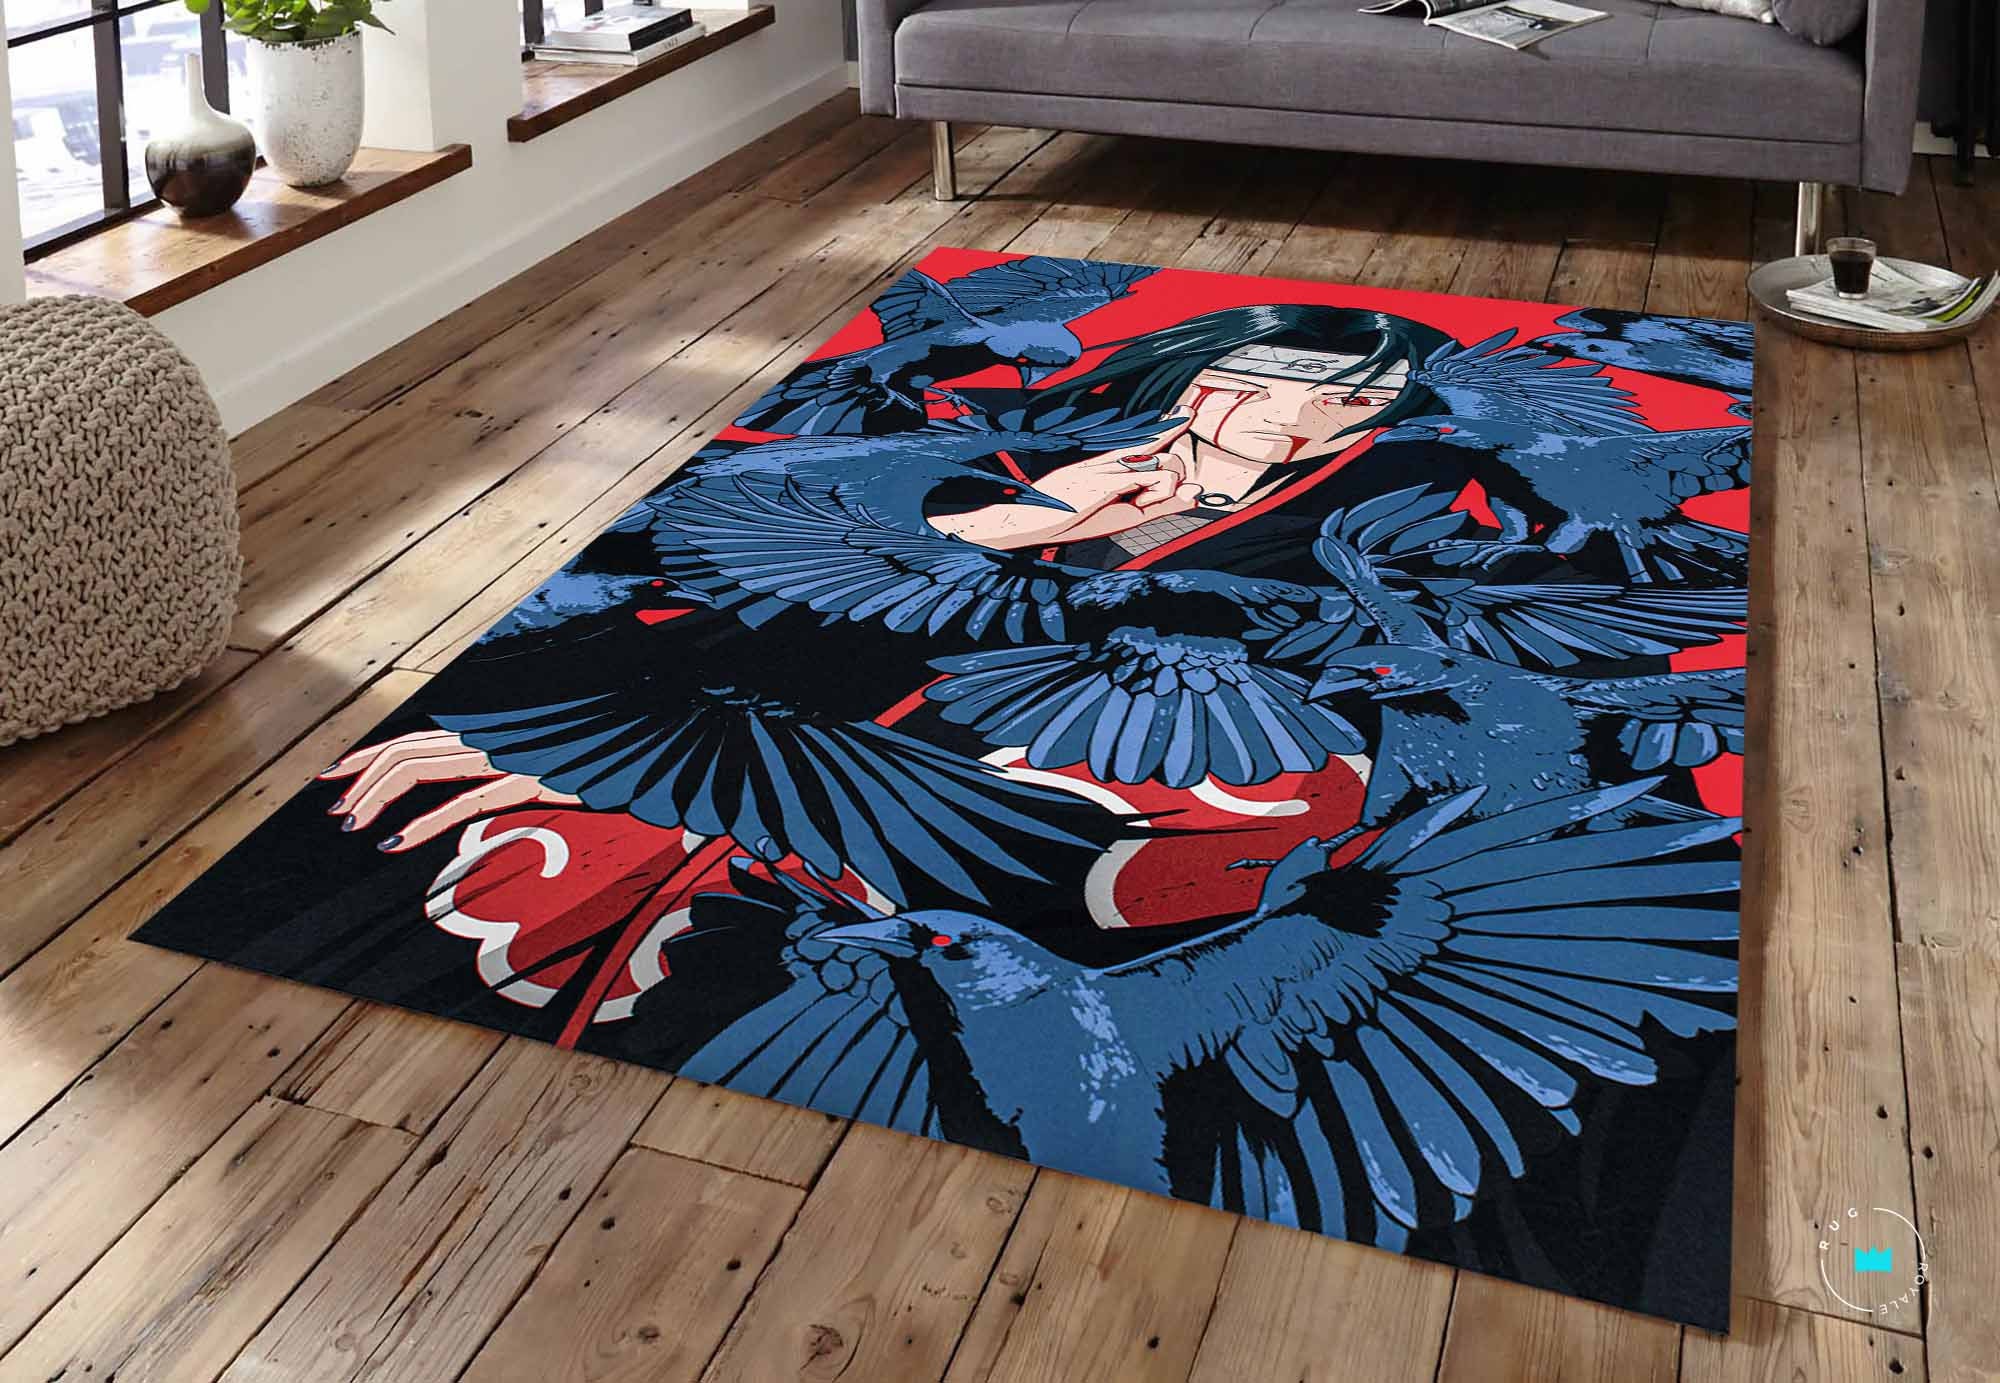 Cartoon One Piece Printed Floor Mats Anti-slip Rugs Anime Luffy Carpets  Front Door Doormat Bathroom Carpet Kitchen Mats Gift - Price history &  Review | AliExpress Seller - YourDreammaker Store | Alitools.io